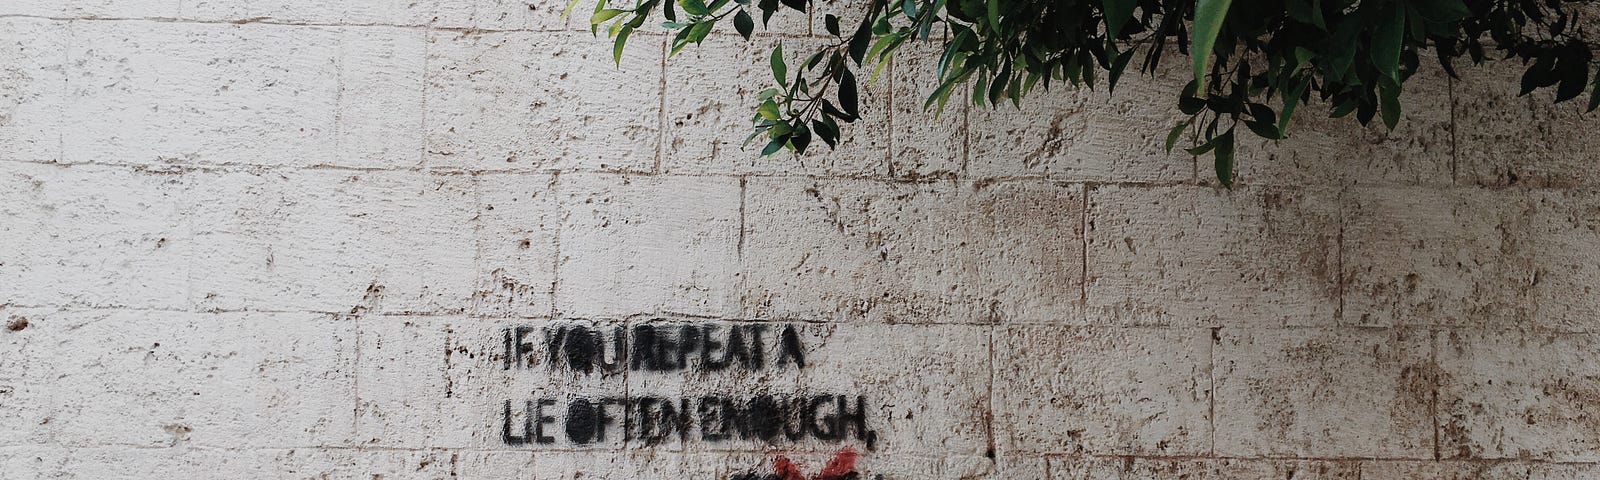 A piece of graffiti on a stone wall. “If you repeat a lie often enough it becomes truth!” But the word ‘truth’ is crossed out, replaced by ‘POLITICS’ in large red letters.